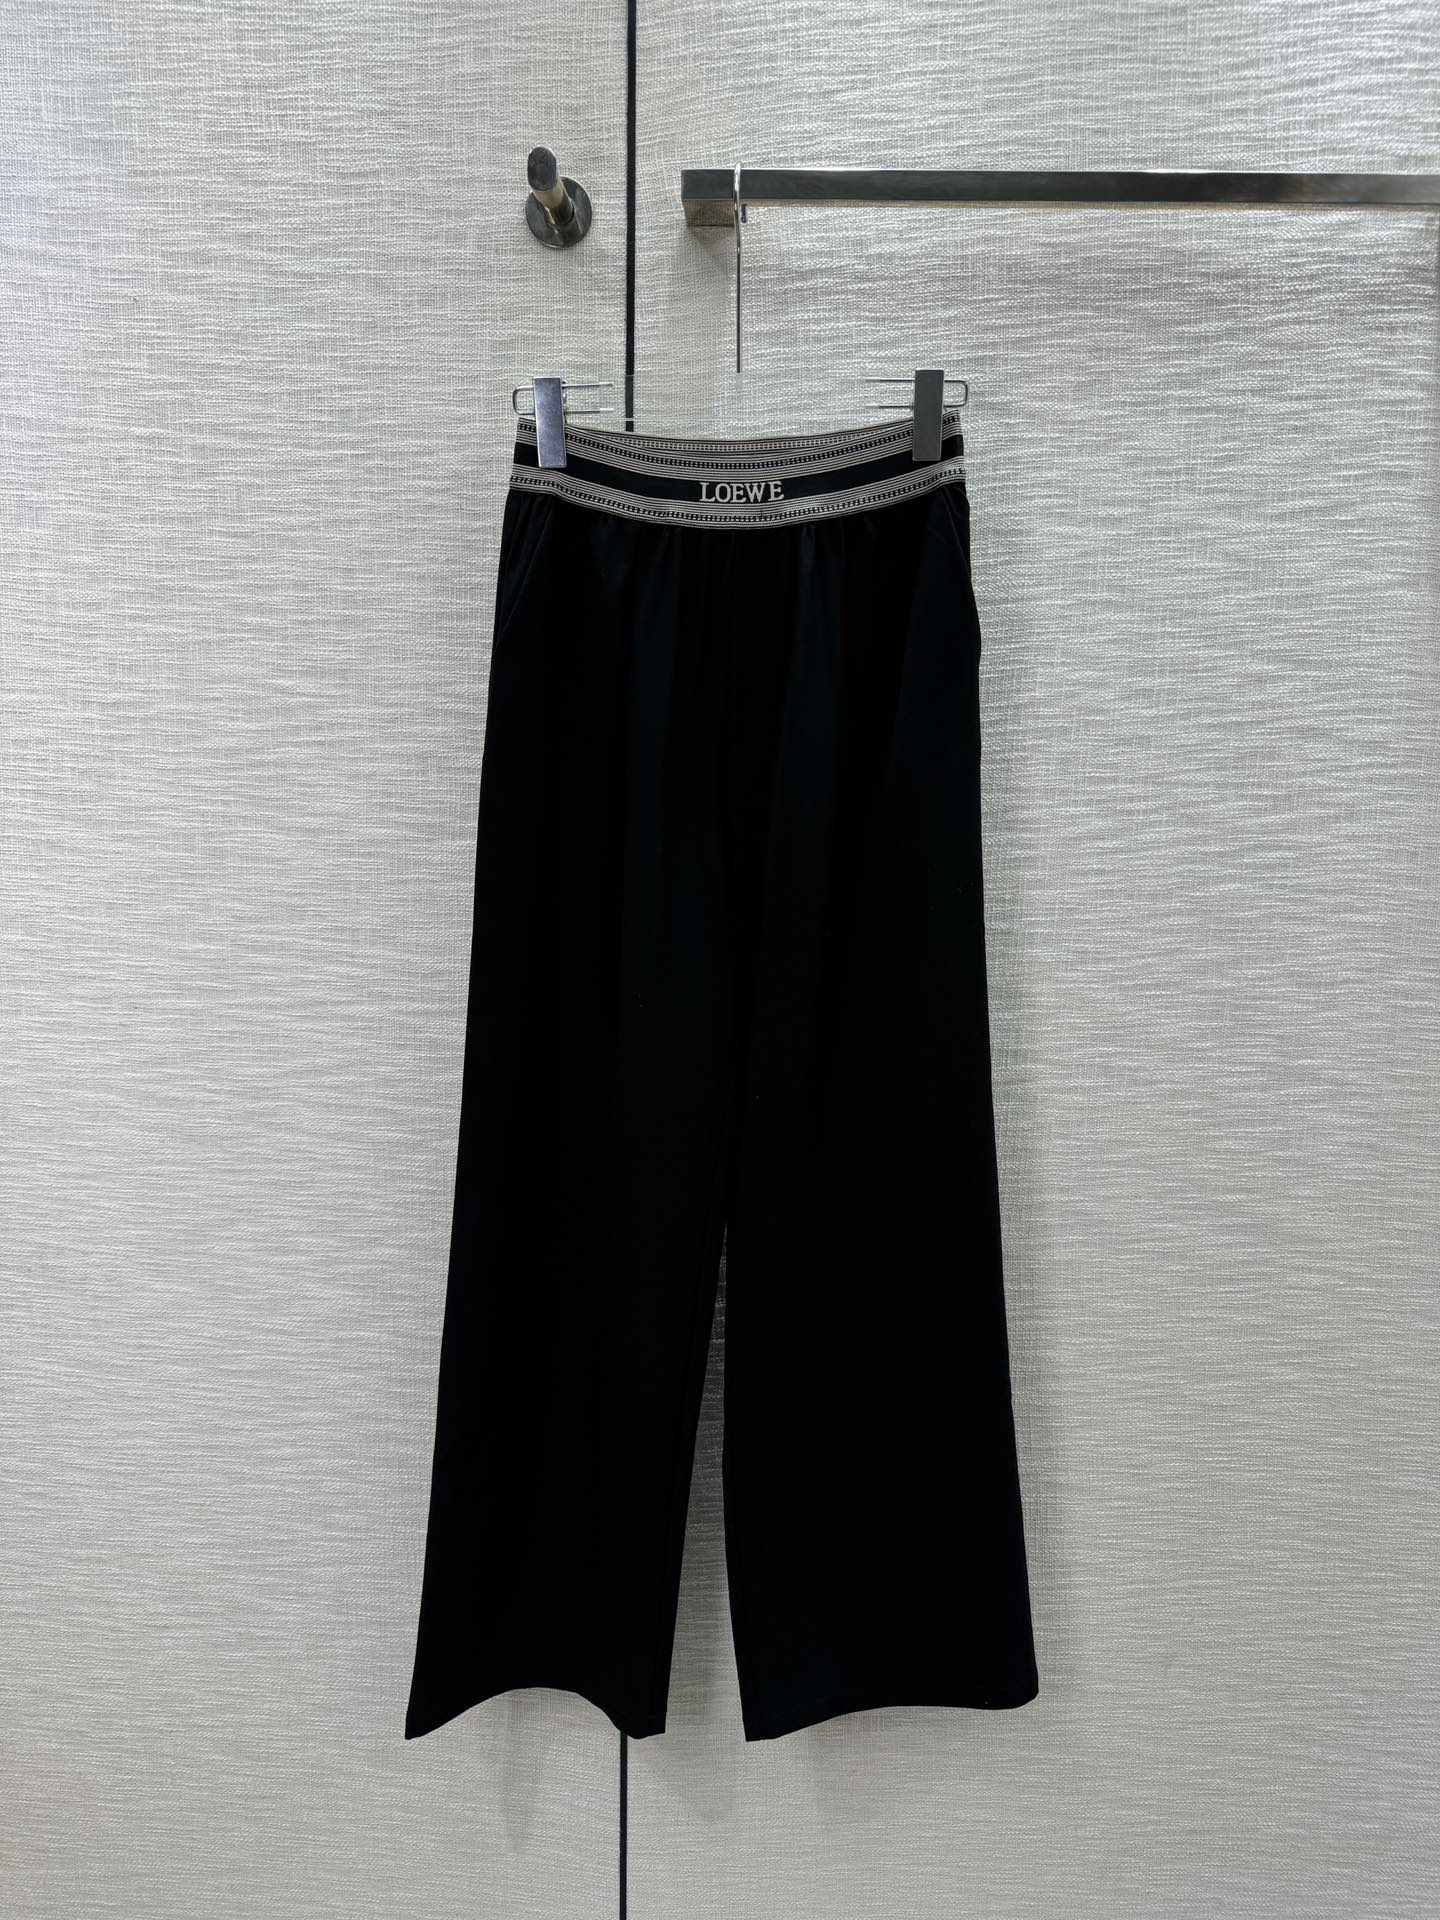 Loewe Clothing Pants & Trousers Cotton Spring/Summer Collection Wide Leg